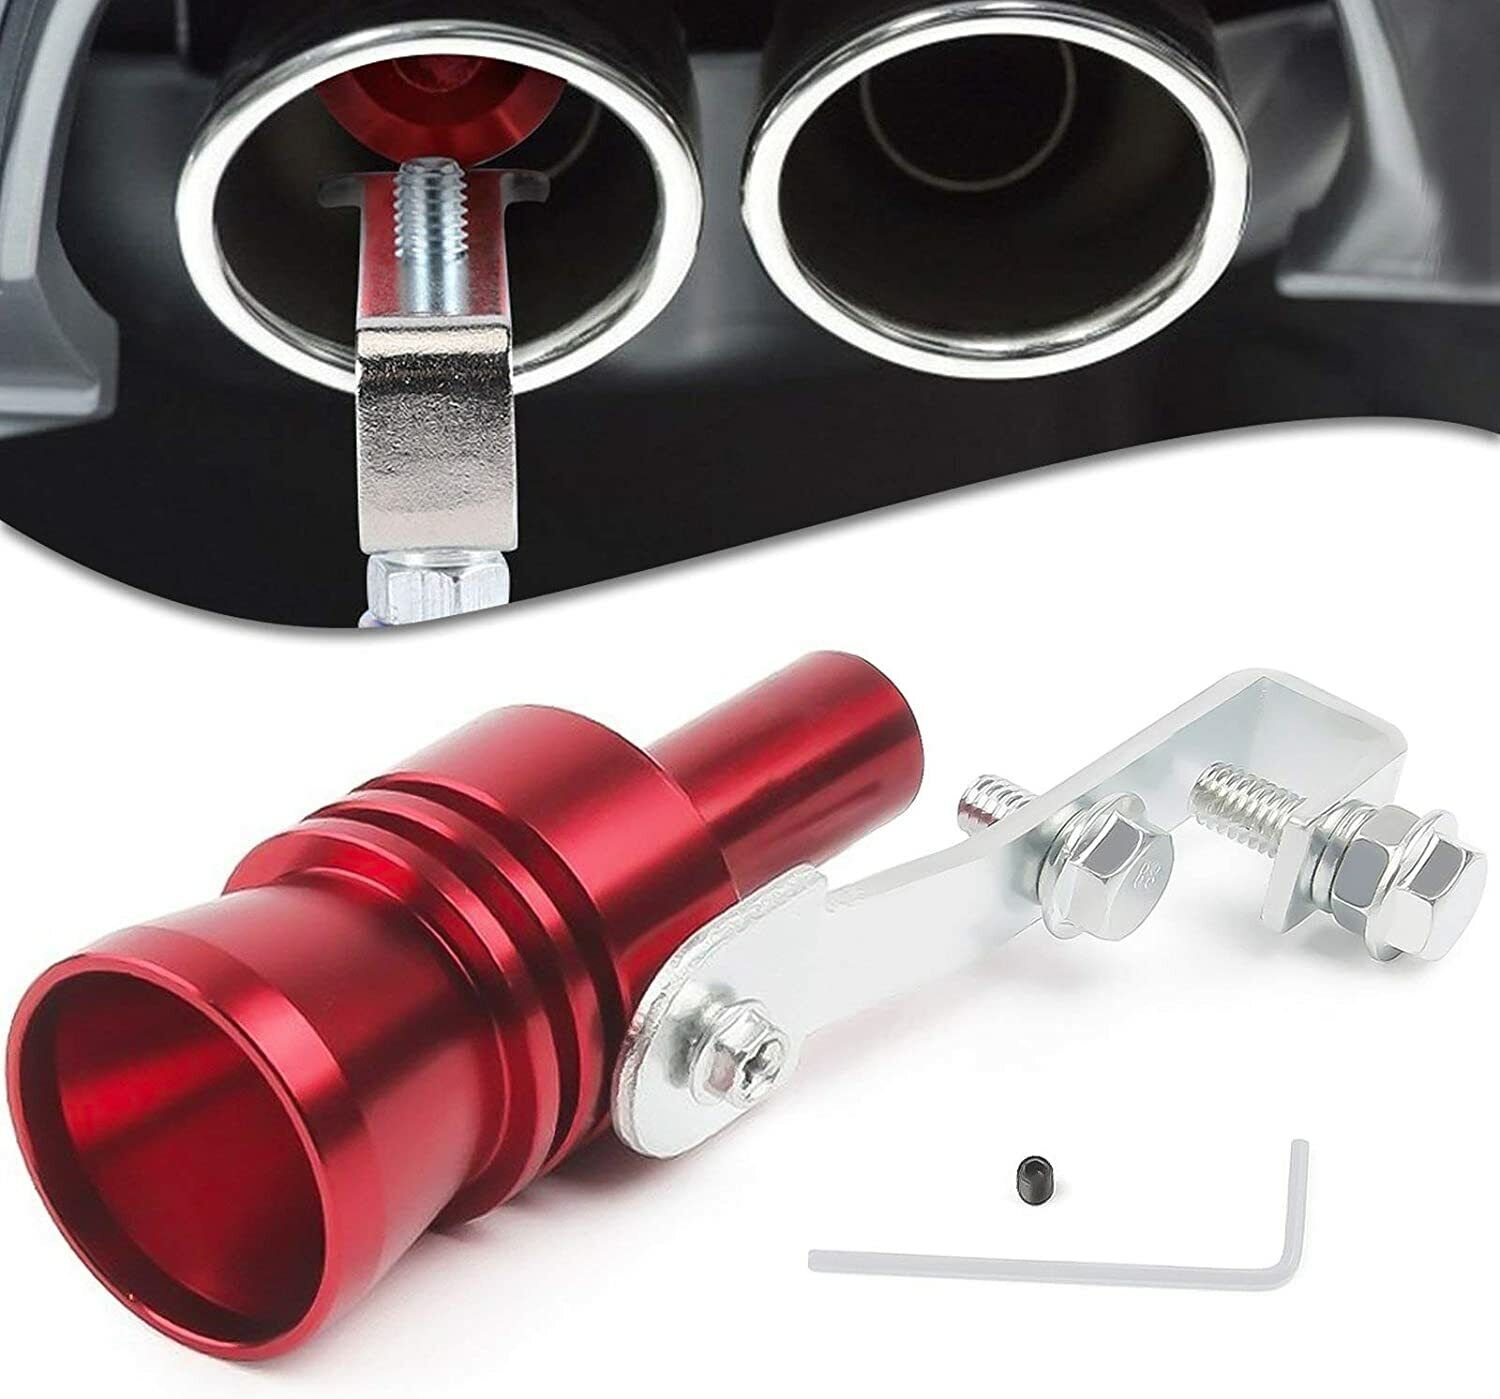 Noise Turbo Sound Exhaust Muffler Pipe Whistle Blow off Valve Car  Accessories